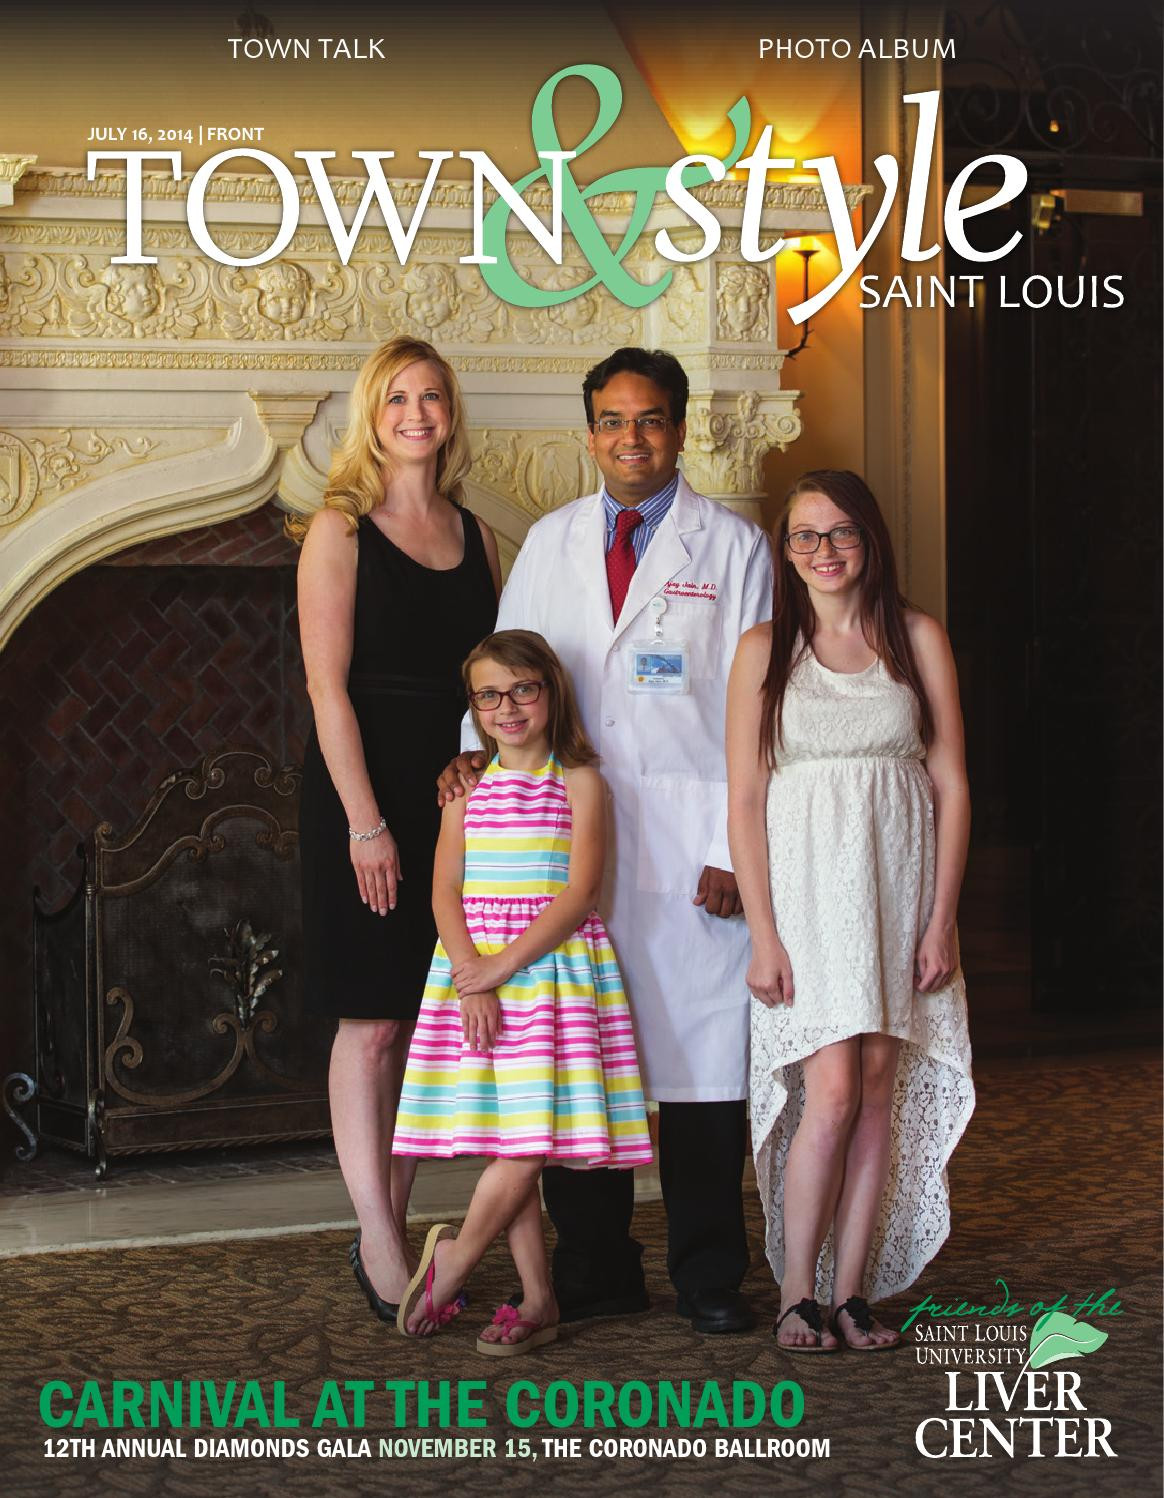 14 Perfect St Louis Crystal France Vase 2024 free download st louis crystal france vase of townstyle st louis 07 16 14 by st louis town style issuu throughout page 1